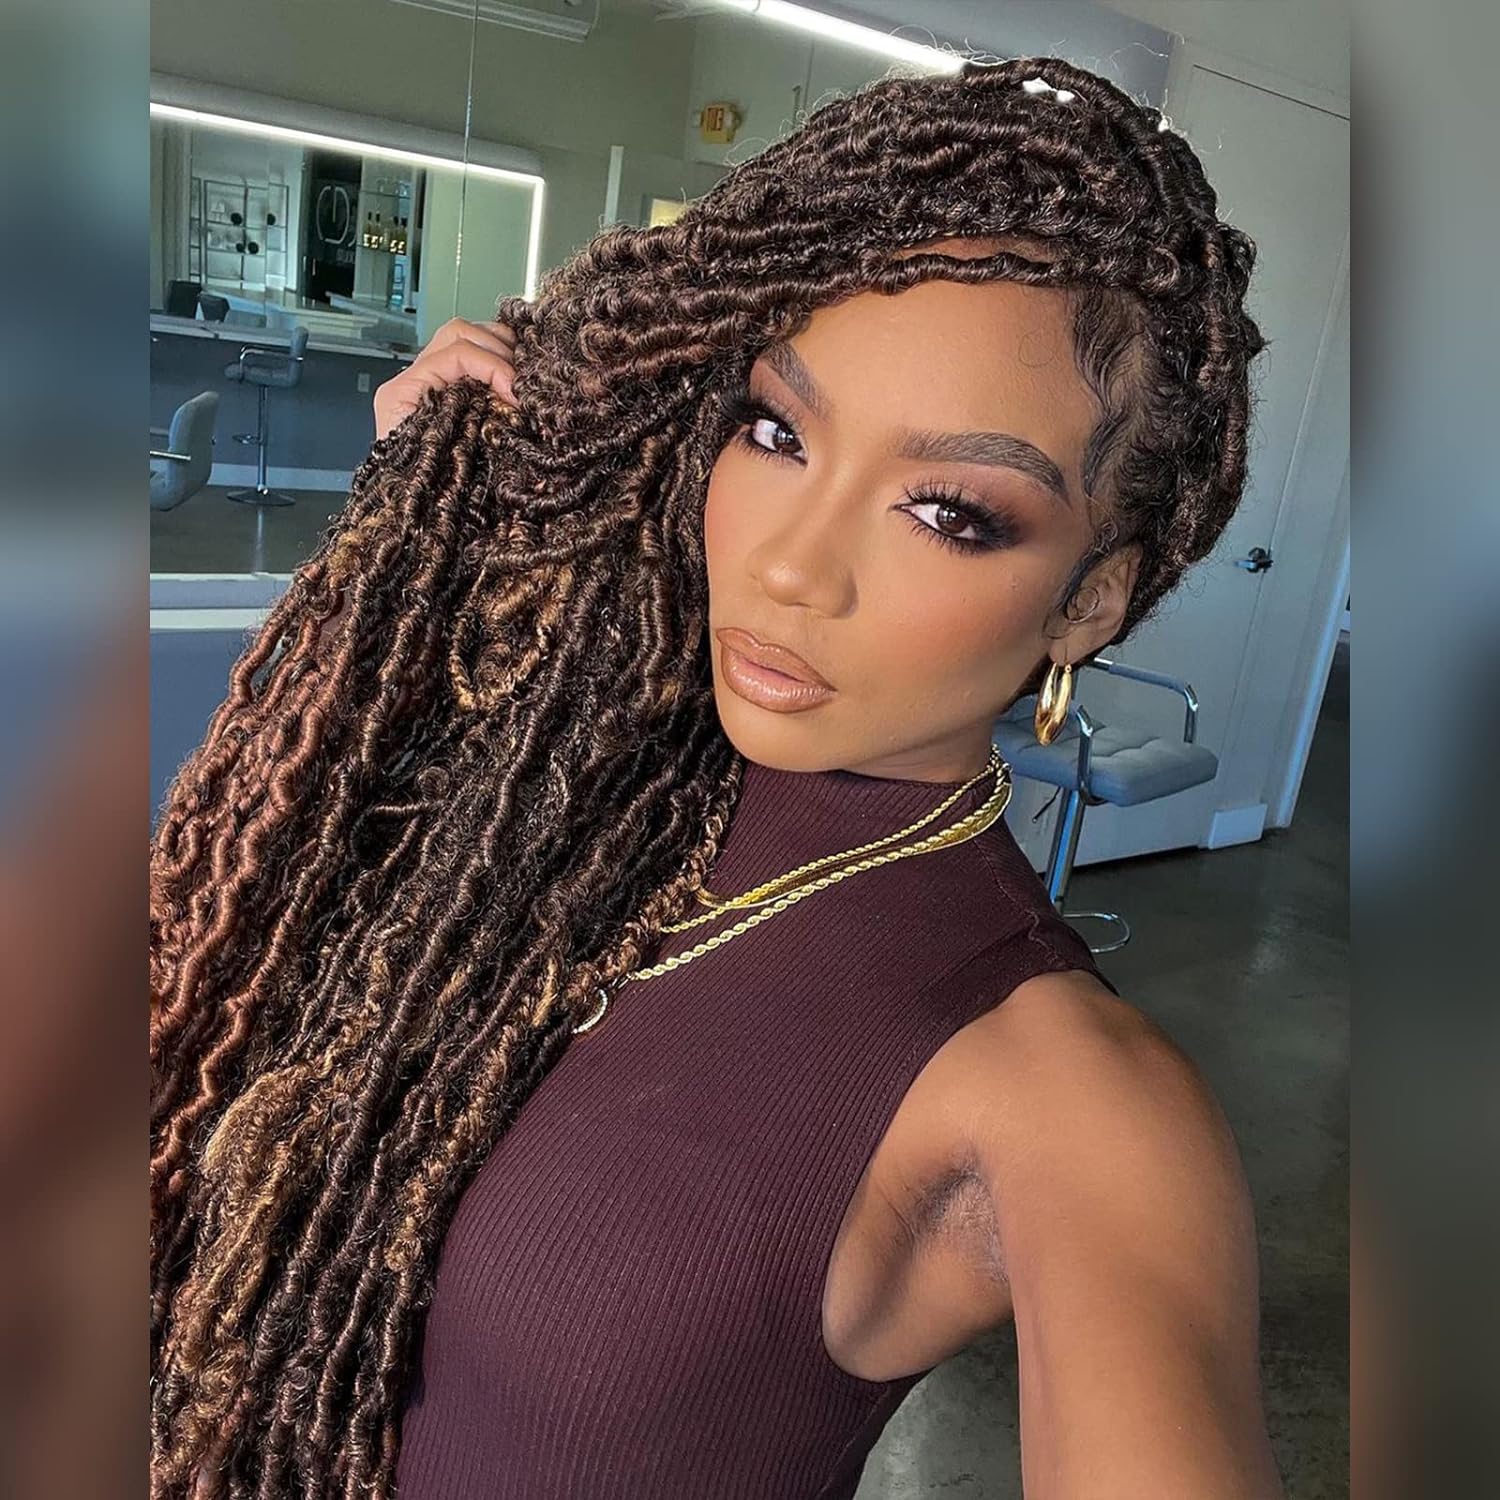 FAST SHIPPING 3-5 DAY FL | Toyotress Faux Locs Crochet Hair - Soft Natural Ombre Brown Long Pre-looped Faux Locs Crochet Braids, Curly Wavy Synthetic Braiding Hair Extensions